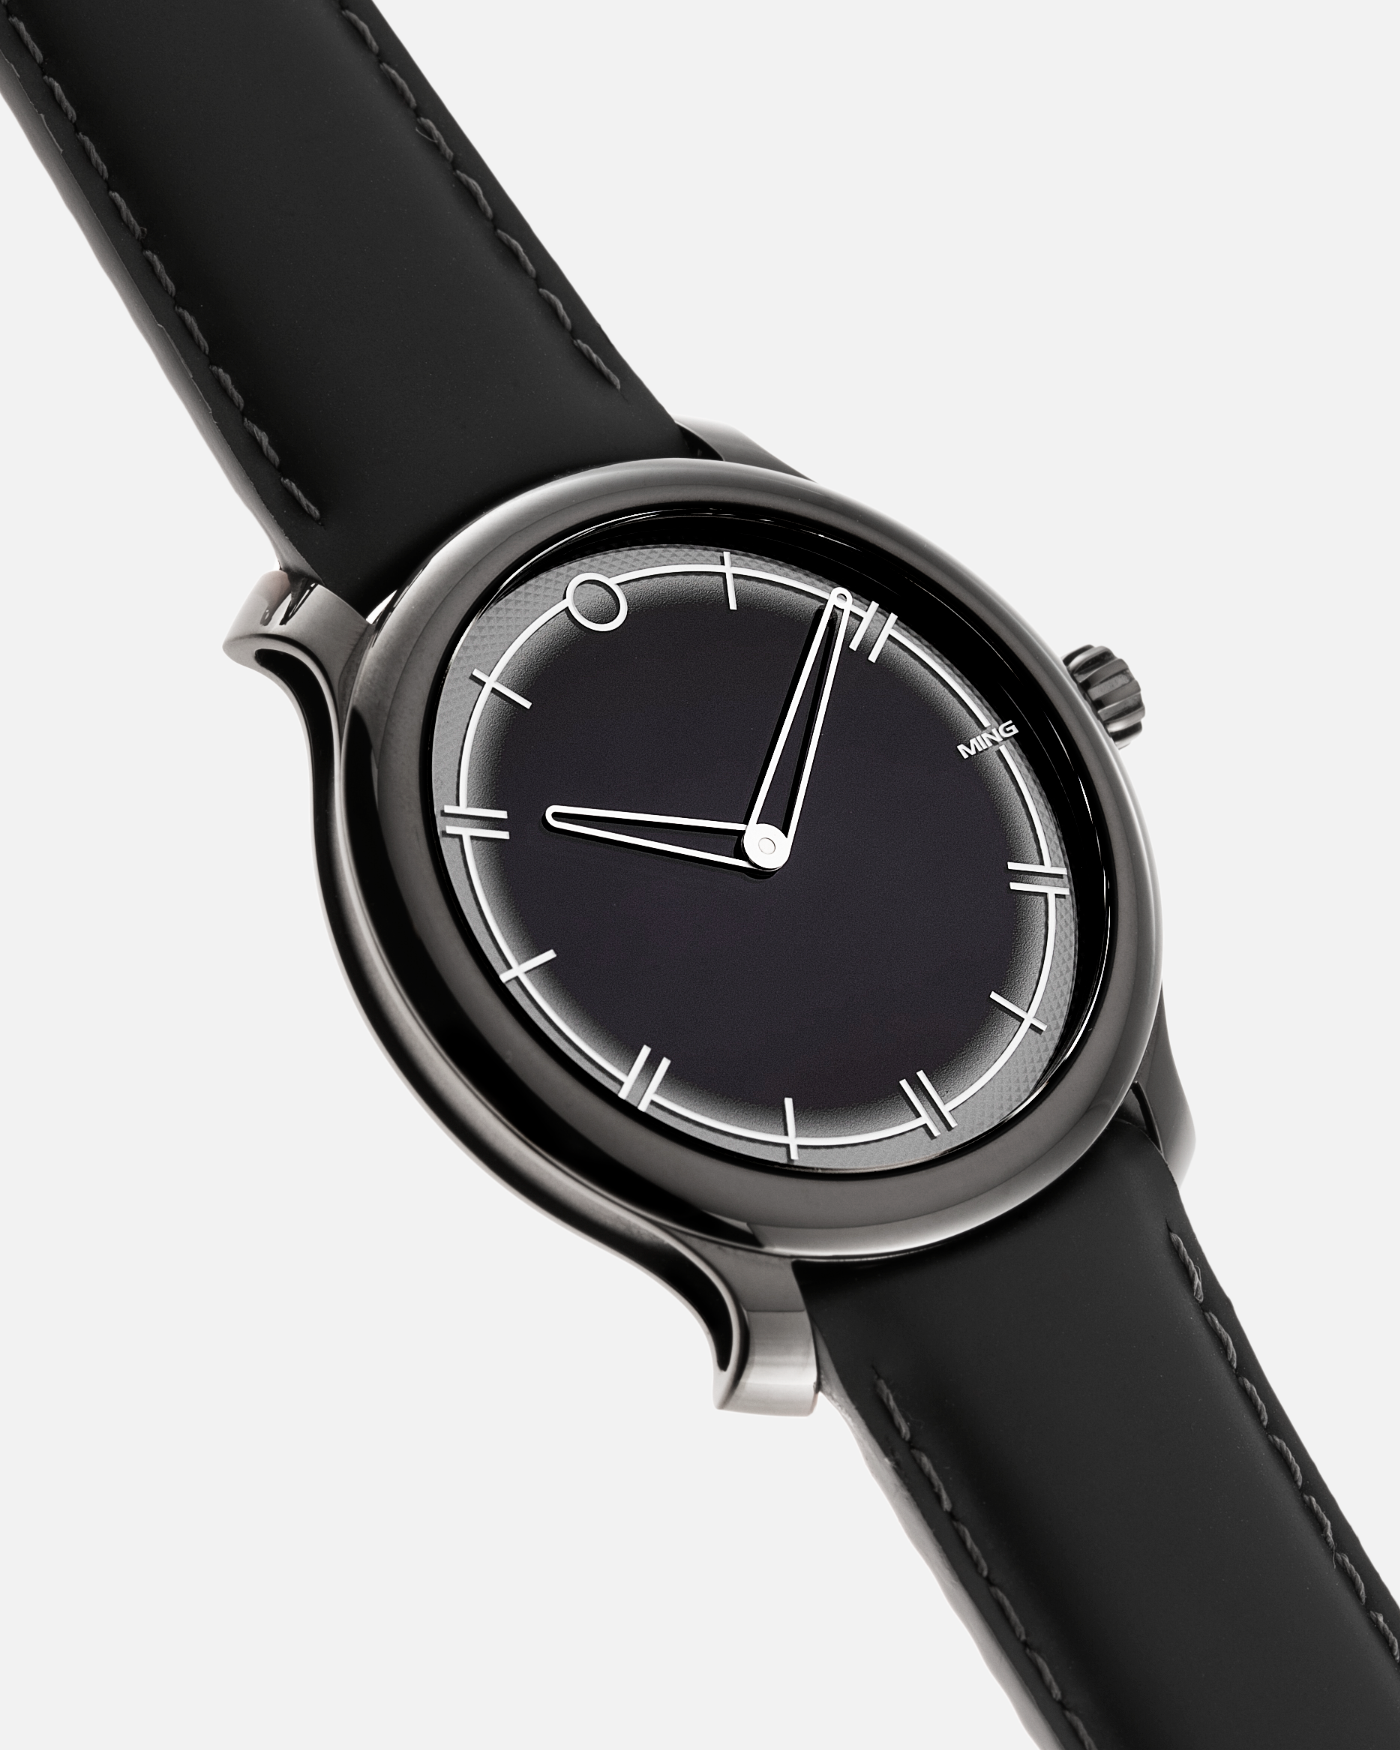 Brand: Ming Year: 2021 Model: 27.02 SPC Friends and Family Material: DLC Coated Stainless Steel Movement: Heavily modified ETA Peseux 7001 Case Diameter: 38mm Strap: Jean Rousseau Black Leather for MING